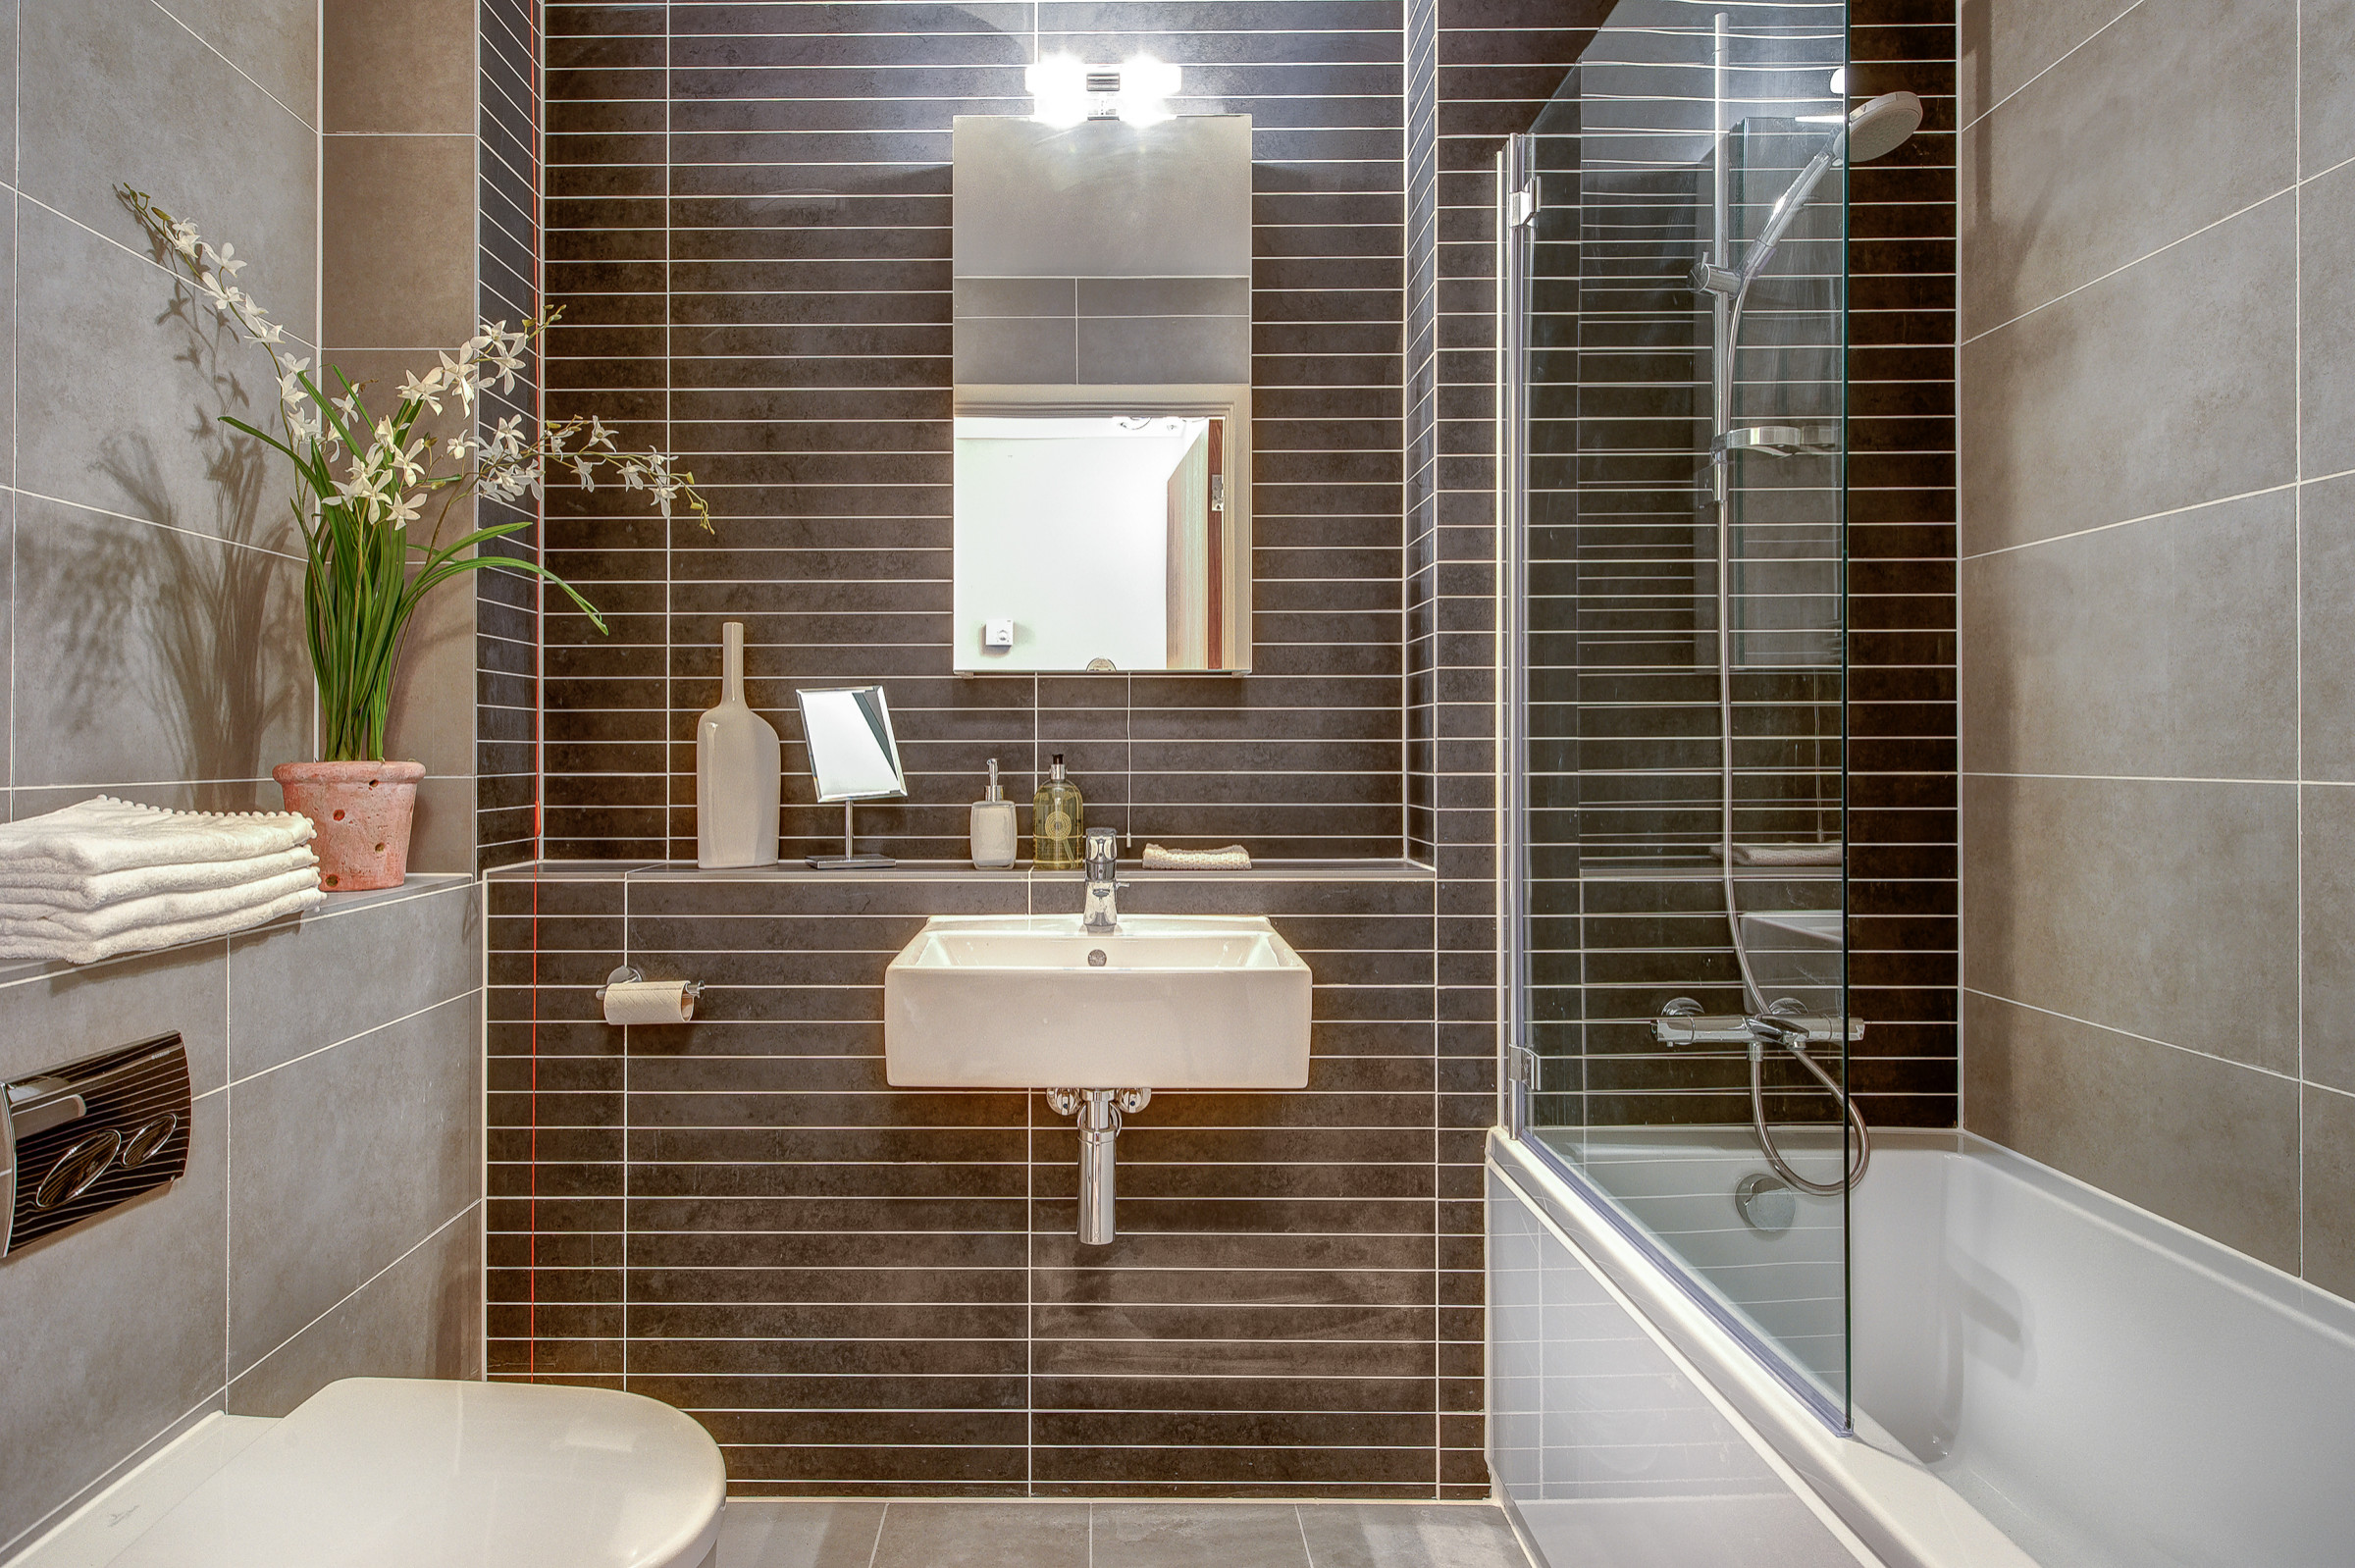 15 Ways to Make Your Over-bath Shower Look Beautiful | Houzz UK